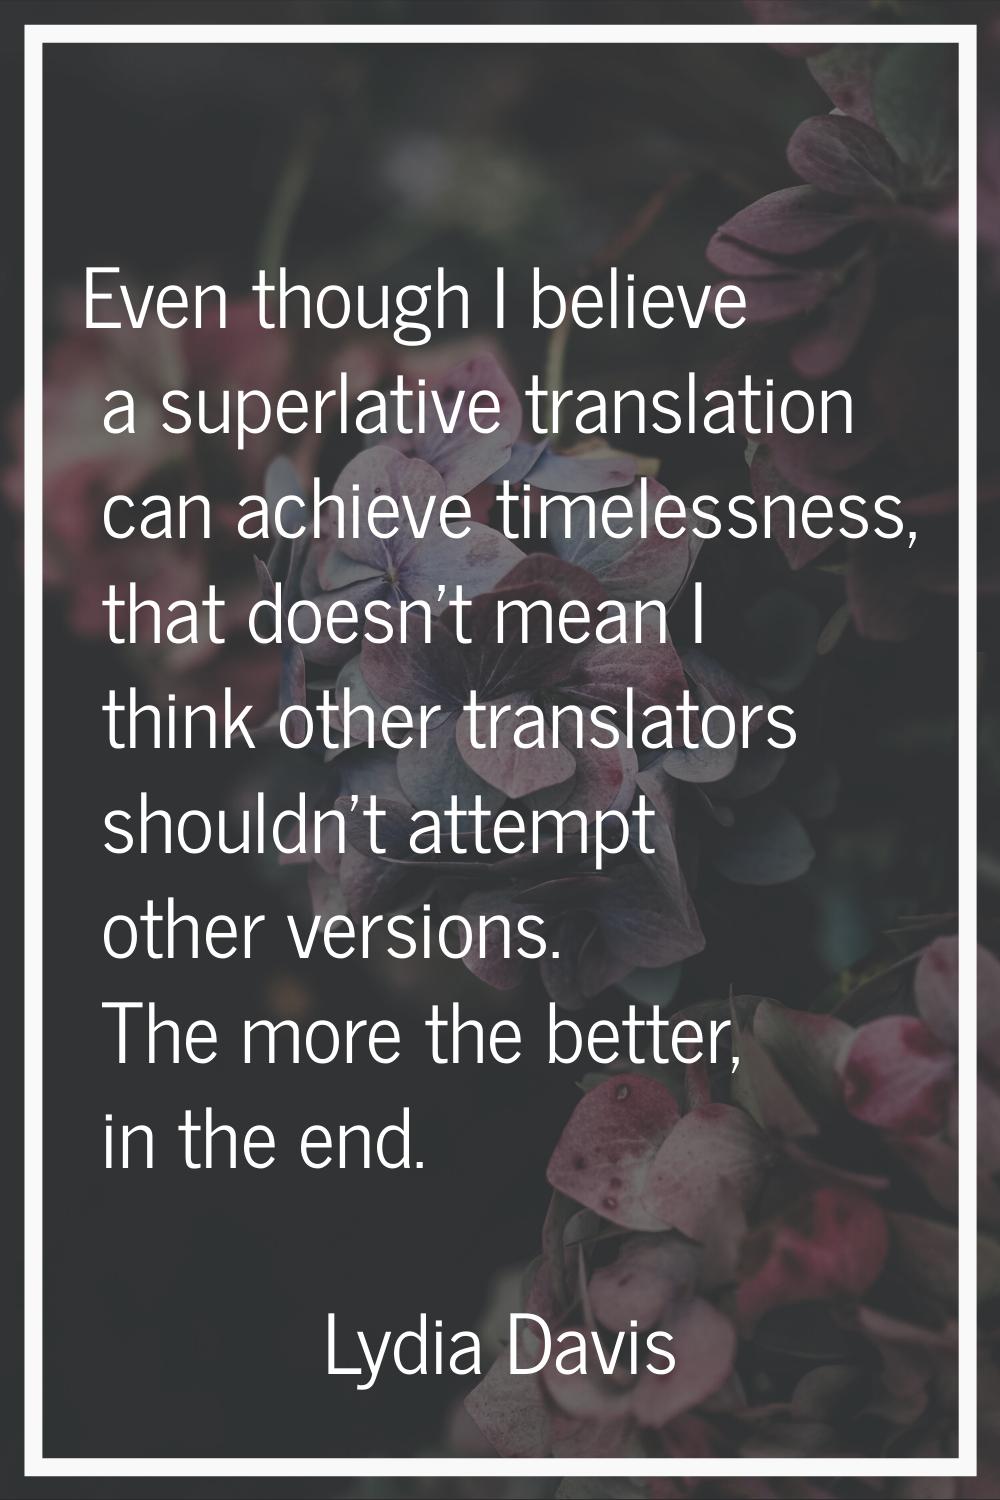 Even though I believe a superlative translation can achieve timelessness, that doesn't mean I think